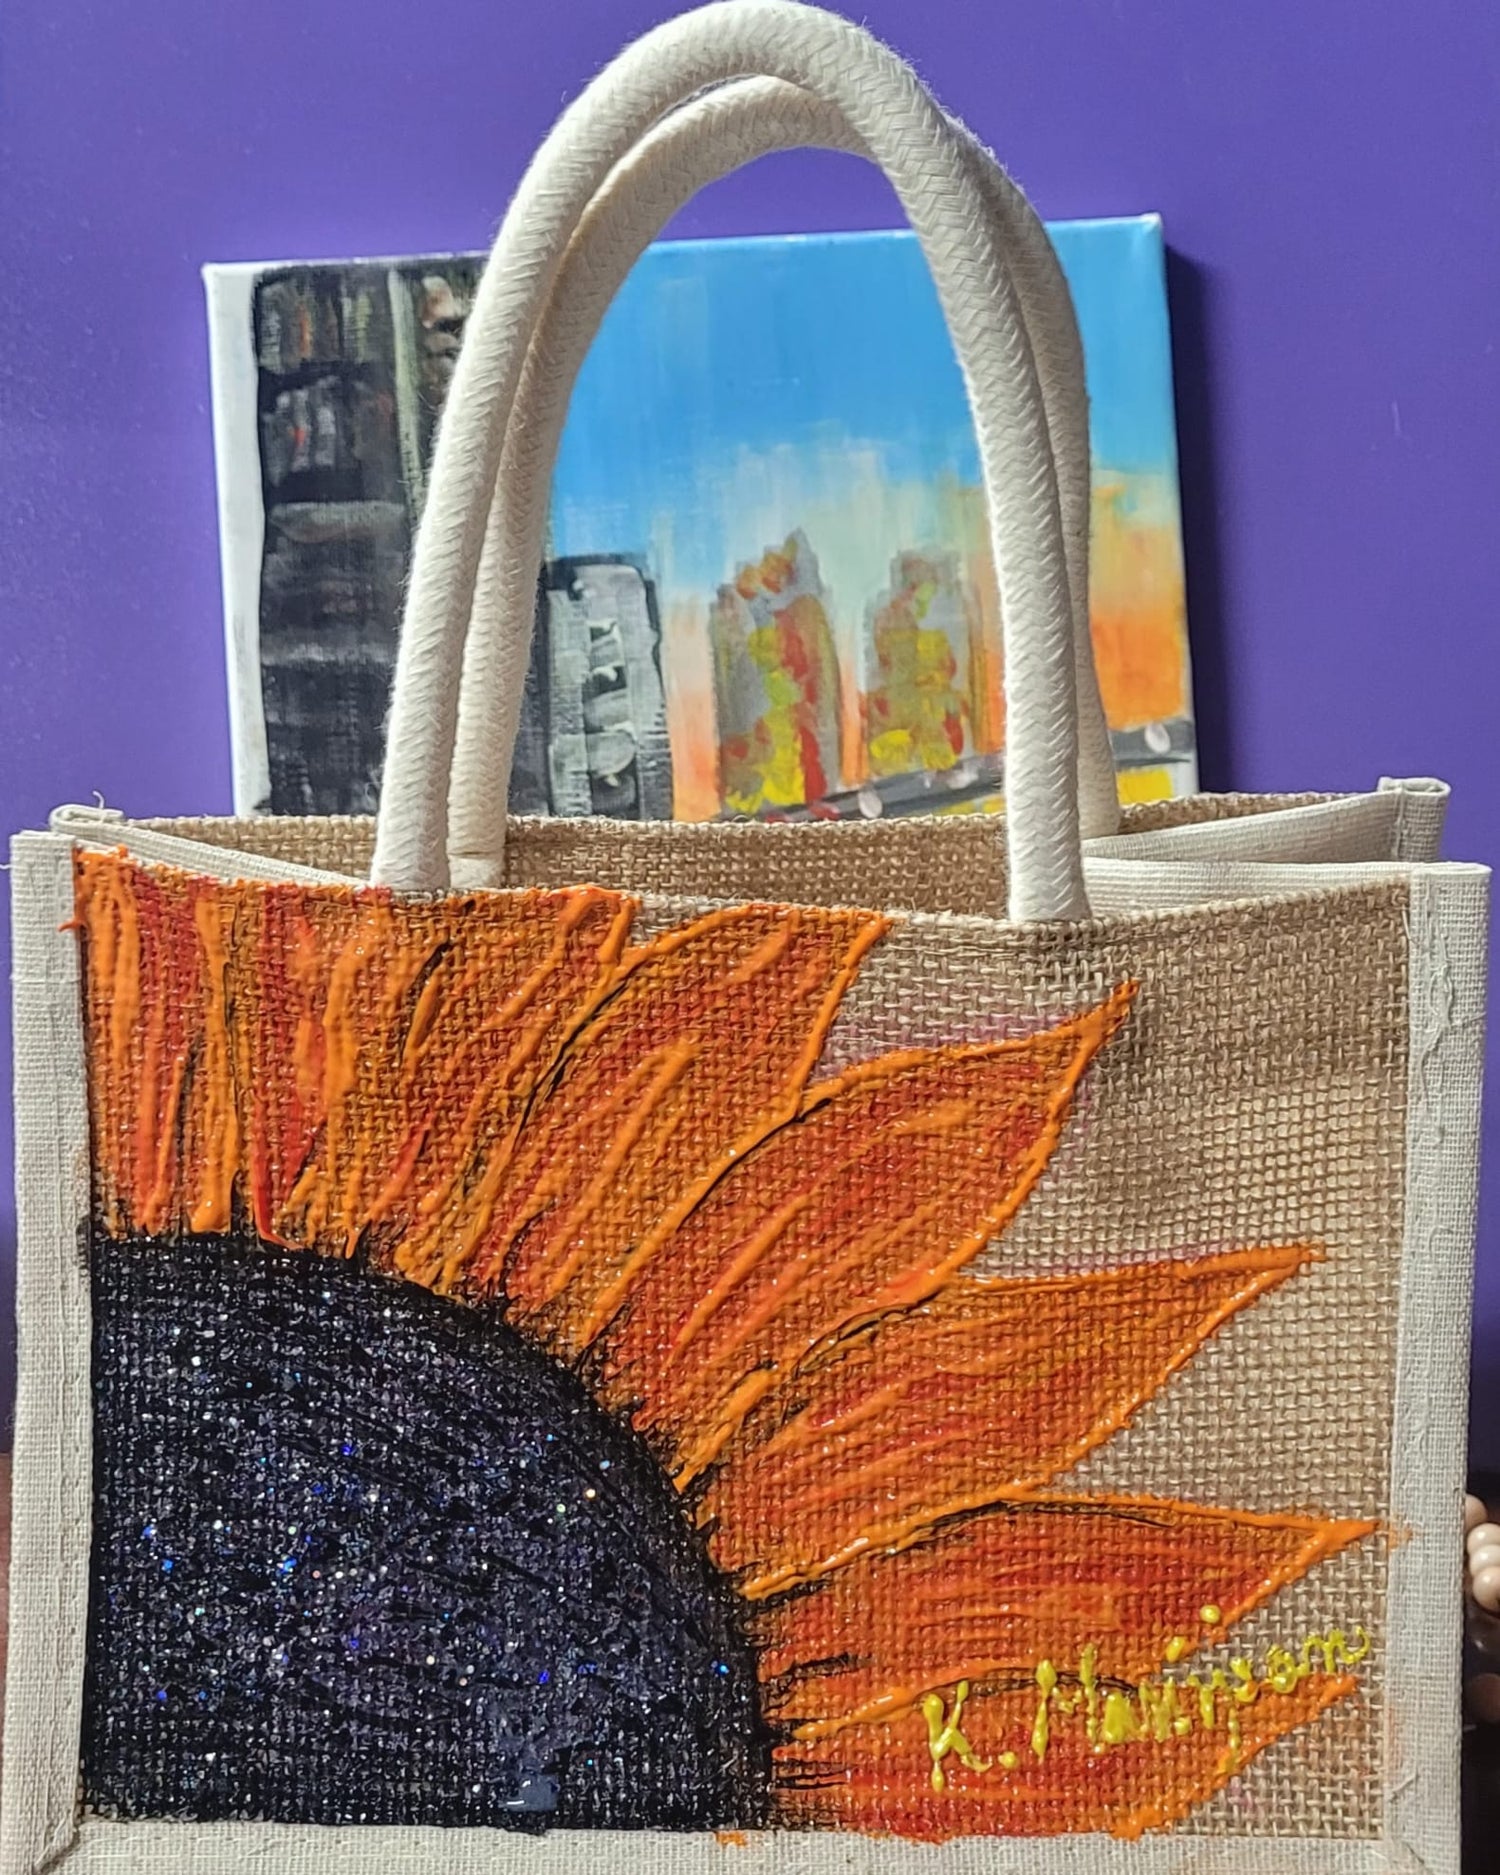 ART BUBS hand painted totes